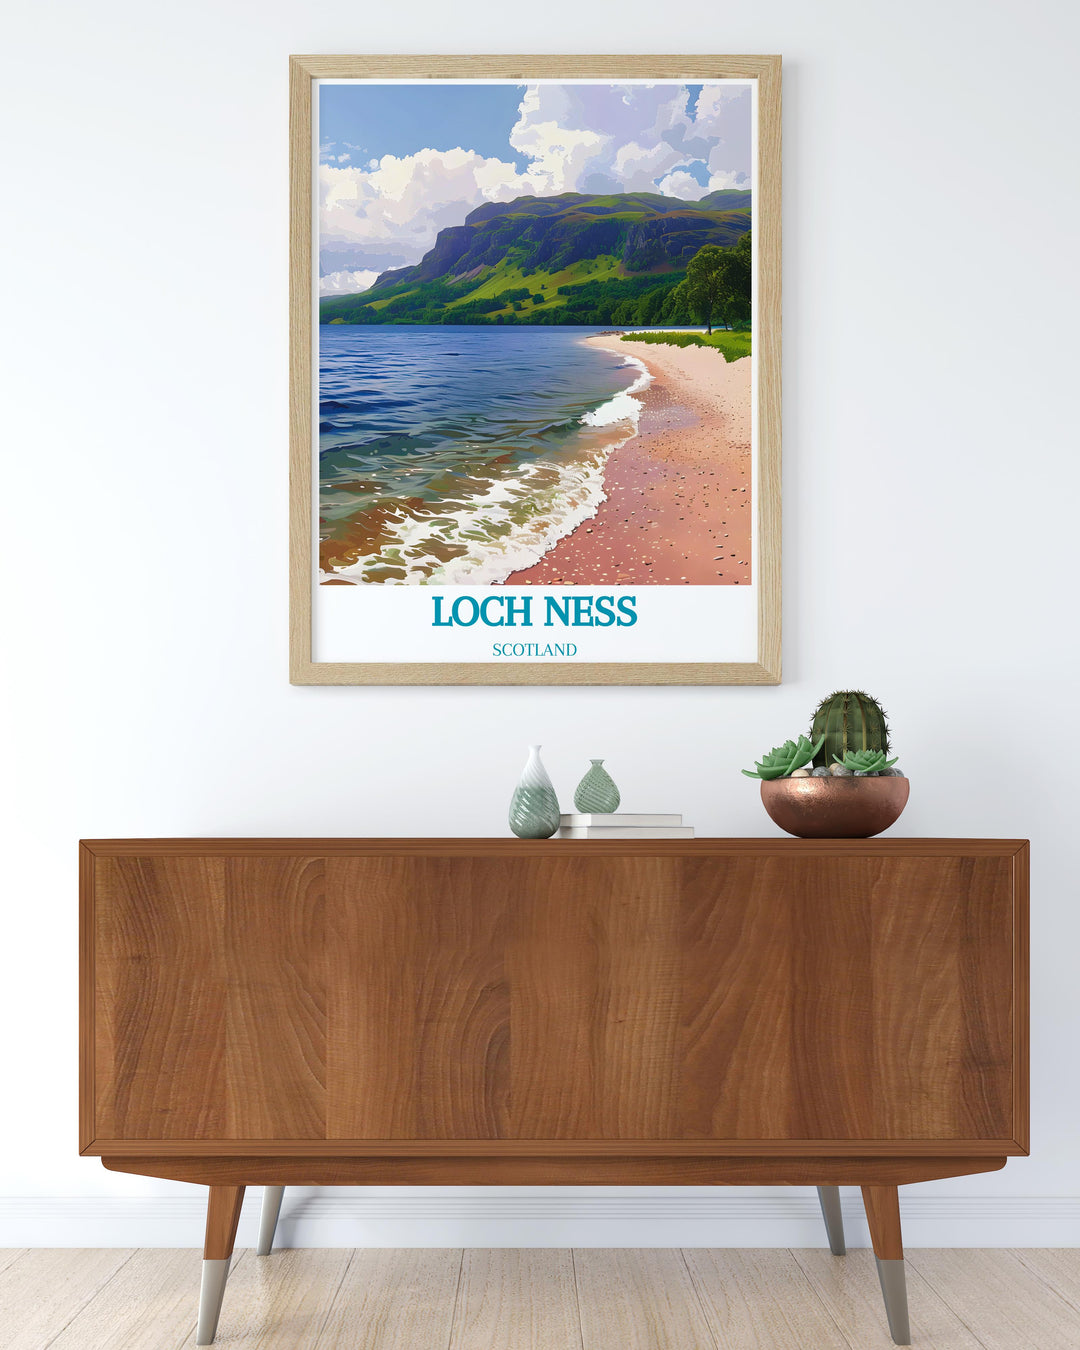 Vibrant framed art of Scotlands iconic landscapes, from Loch Ness to the rolling hills, perfect for nature lovers.